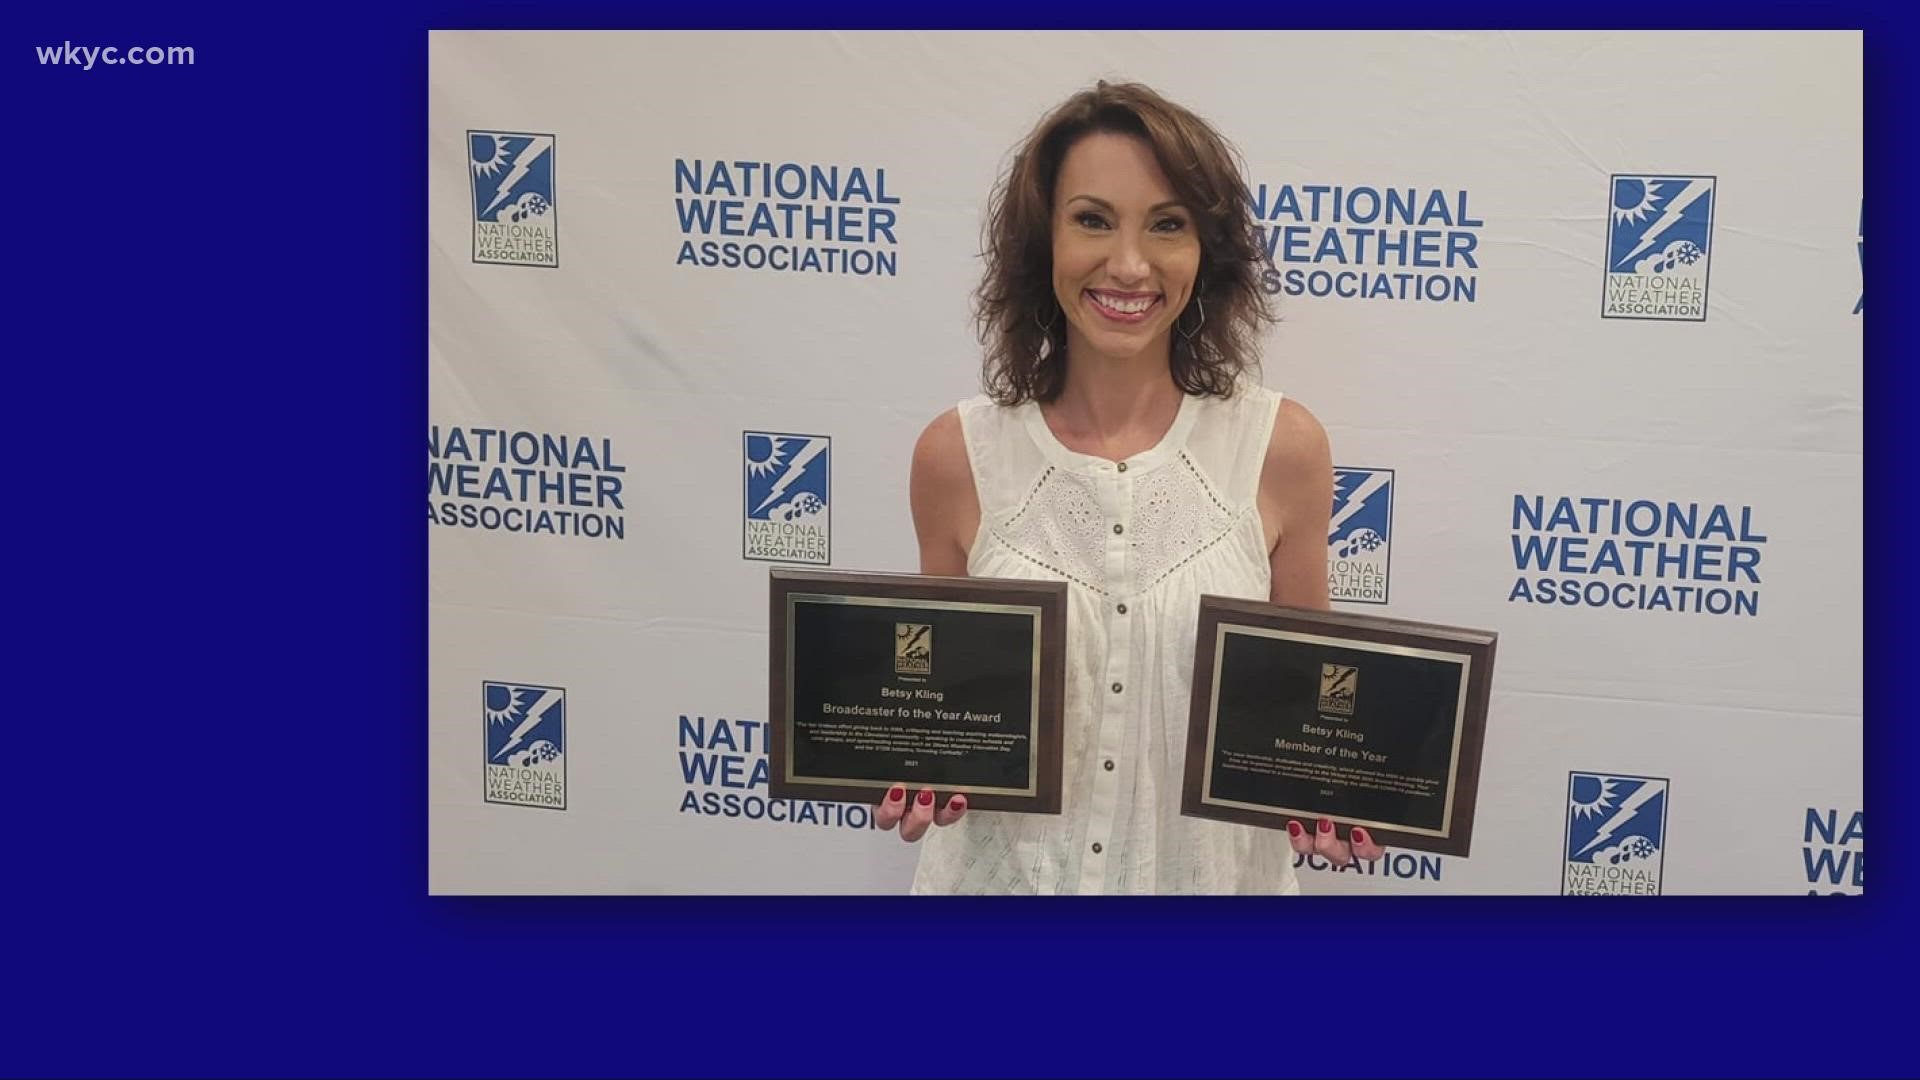 Congratulations to WKYC's own Betsy Kling on being named "Broadcaster of the Year" by the National Weather Association. Betsy also won 'Member of the Year.'